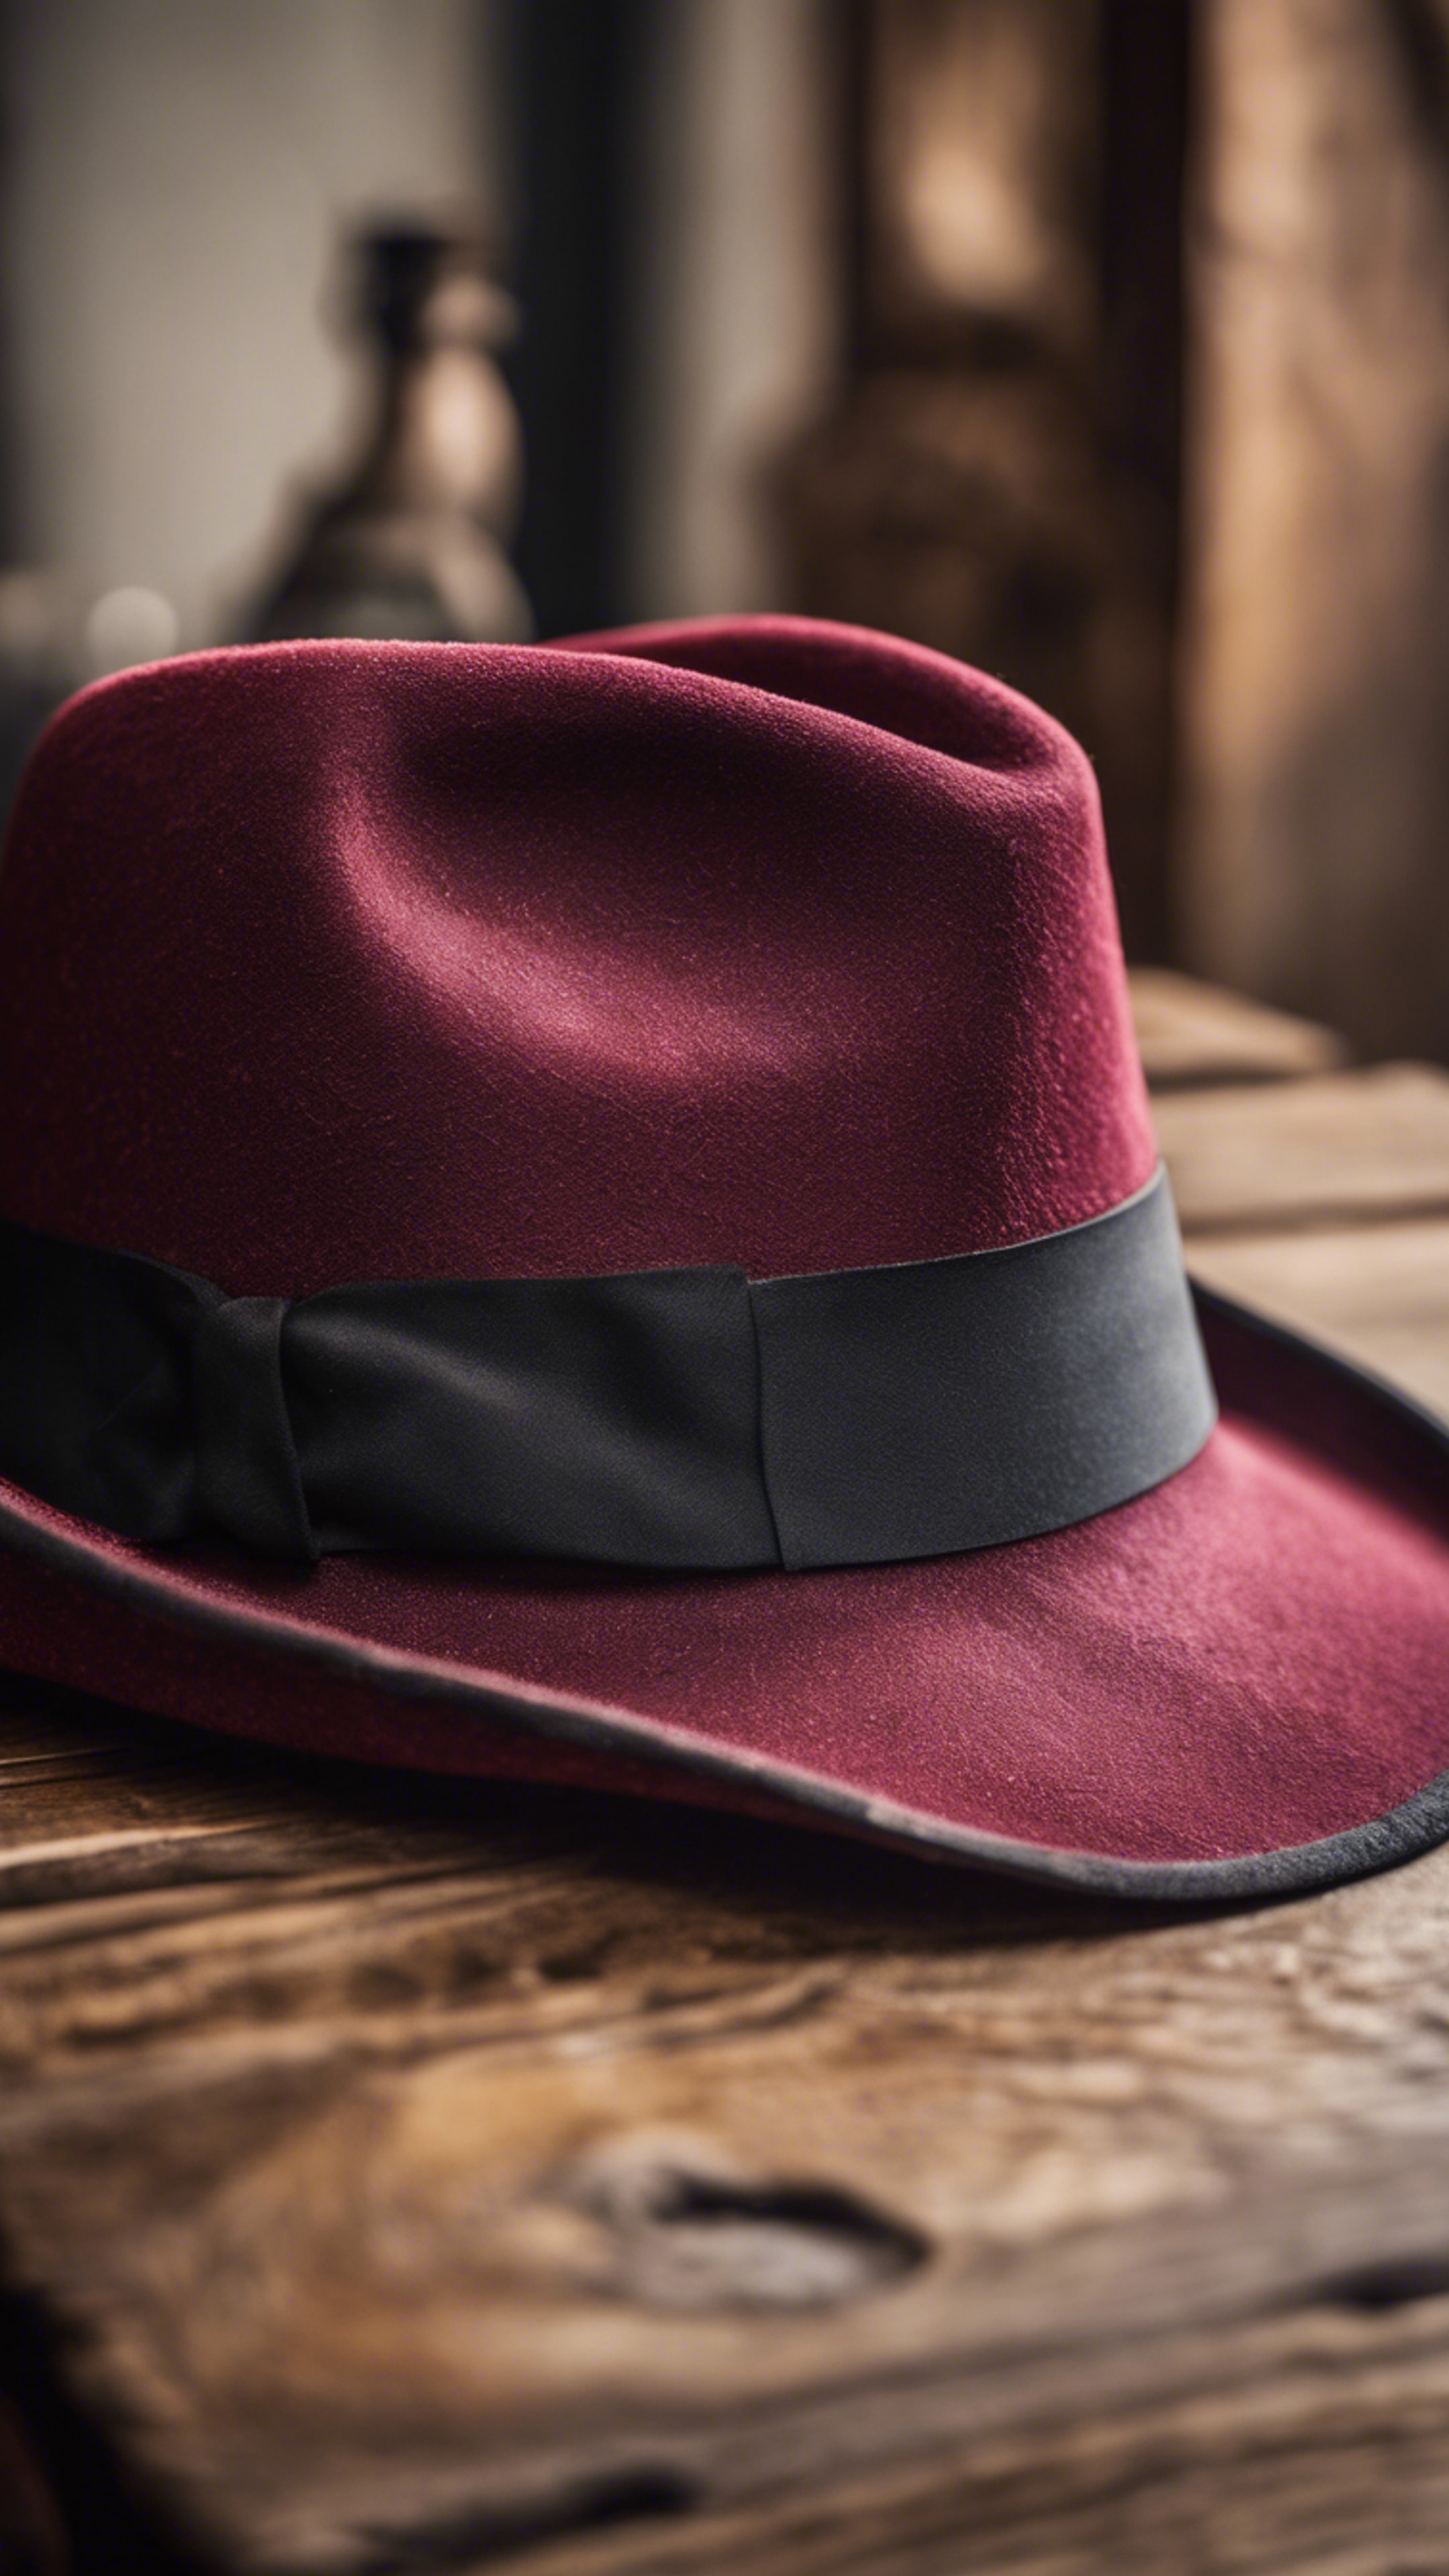 A cool maroon fedora hat positioned on an antique wooden table. Tapeta[05b3f475f93c4ade83cc]